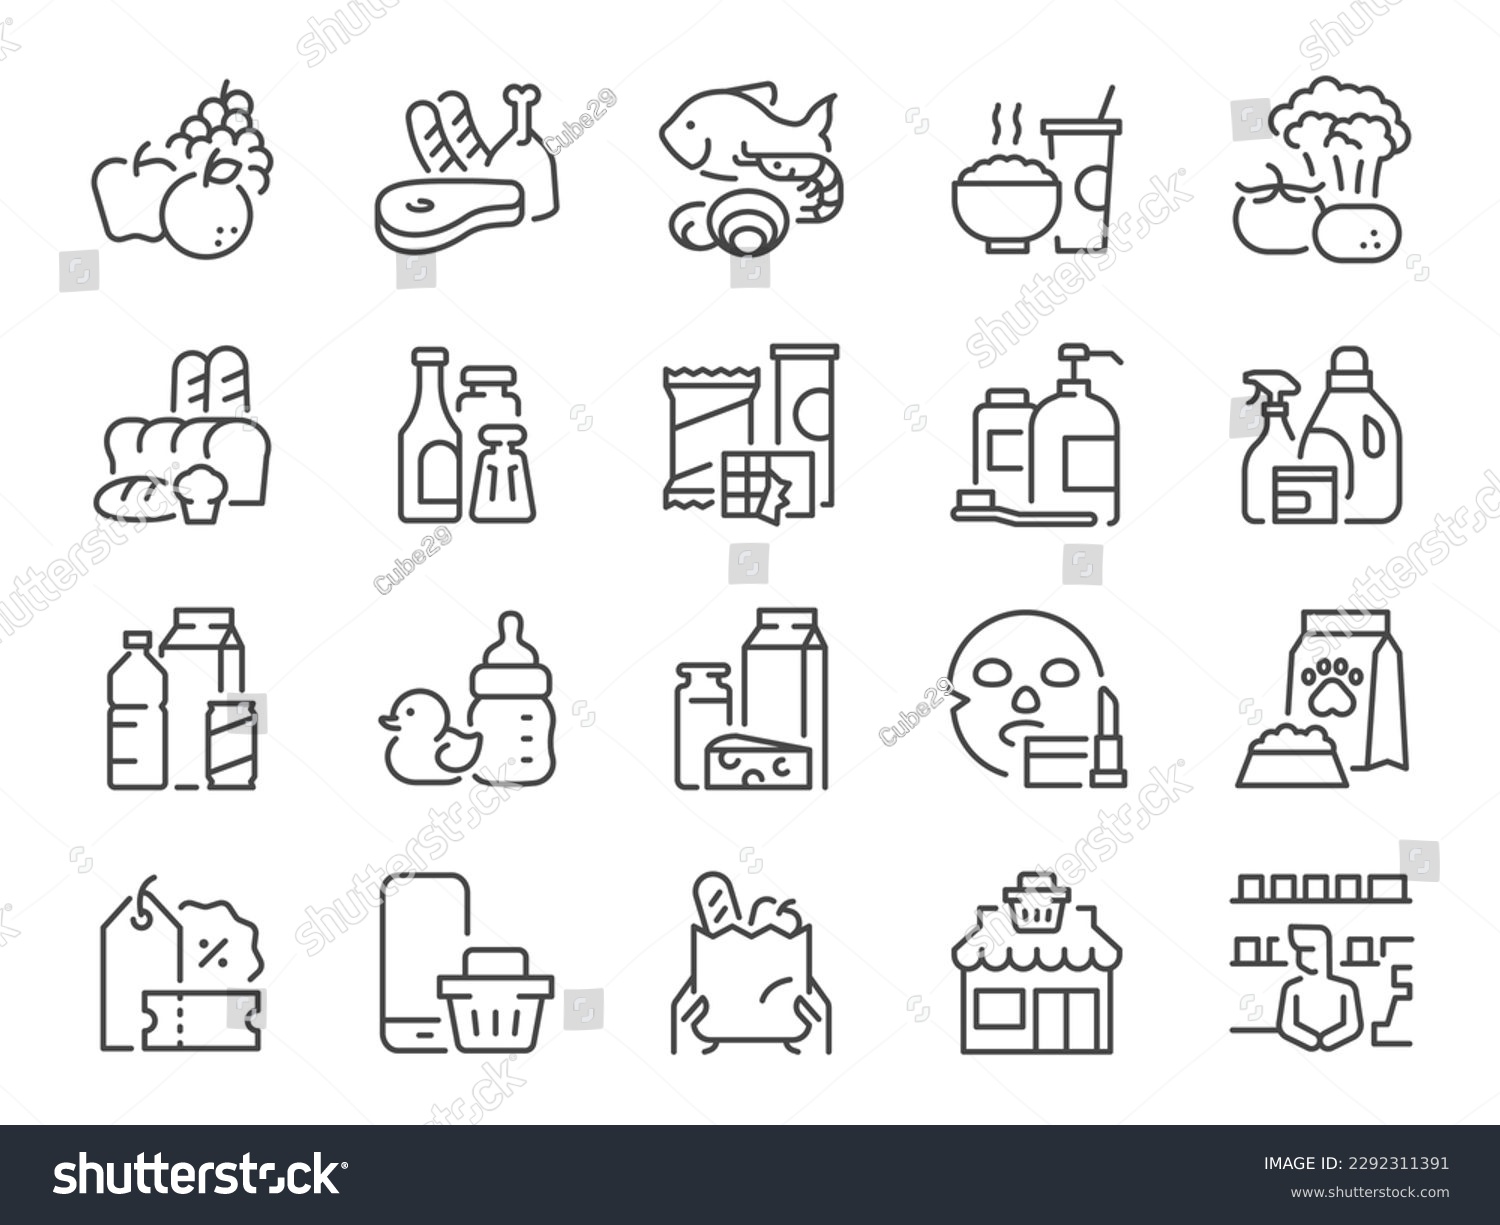 Grocery types icon set. It included Grocery shop, store, super market, mart, flea market, and more icons. #2292311391